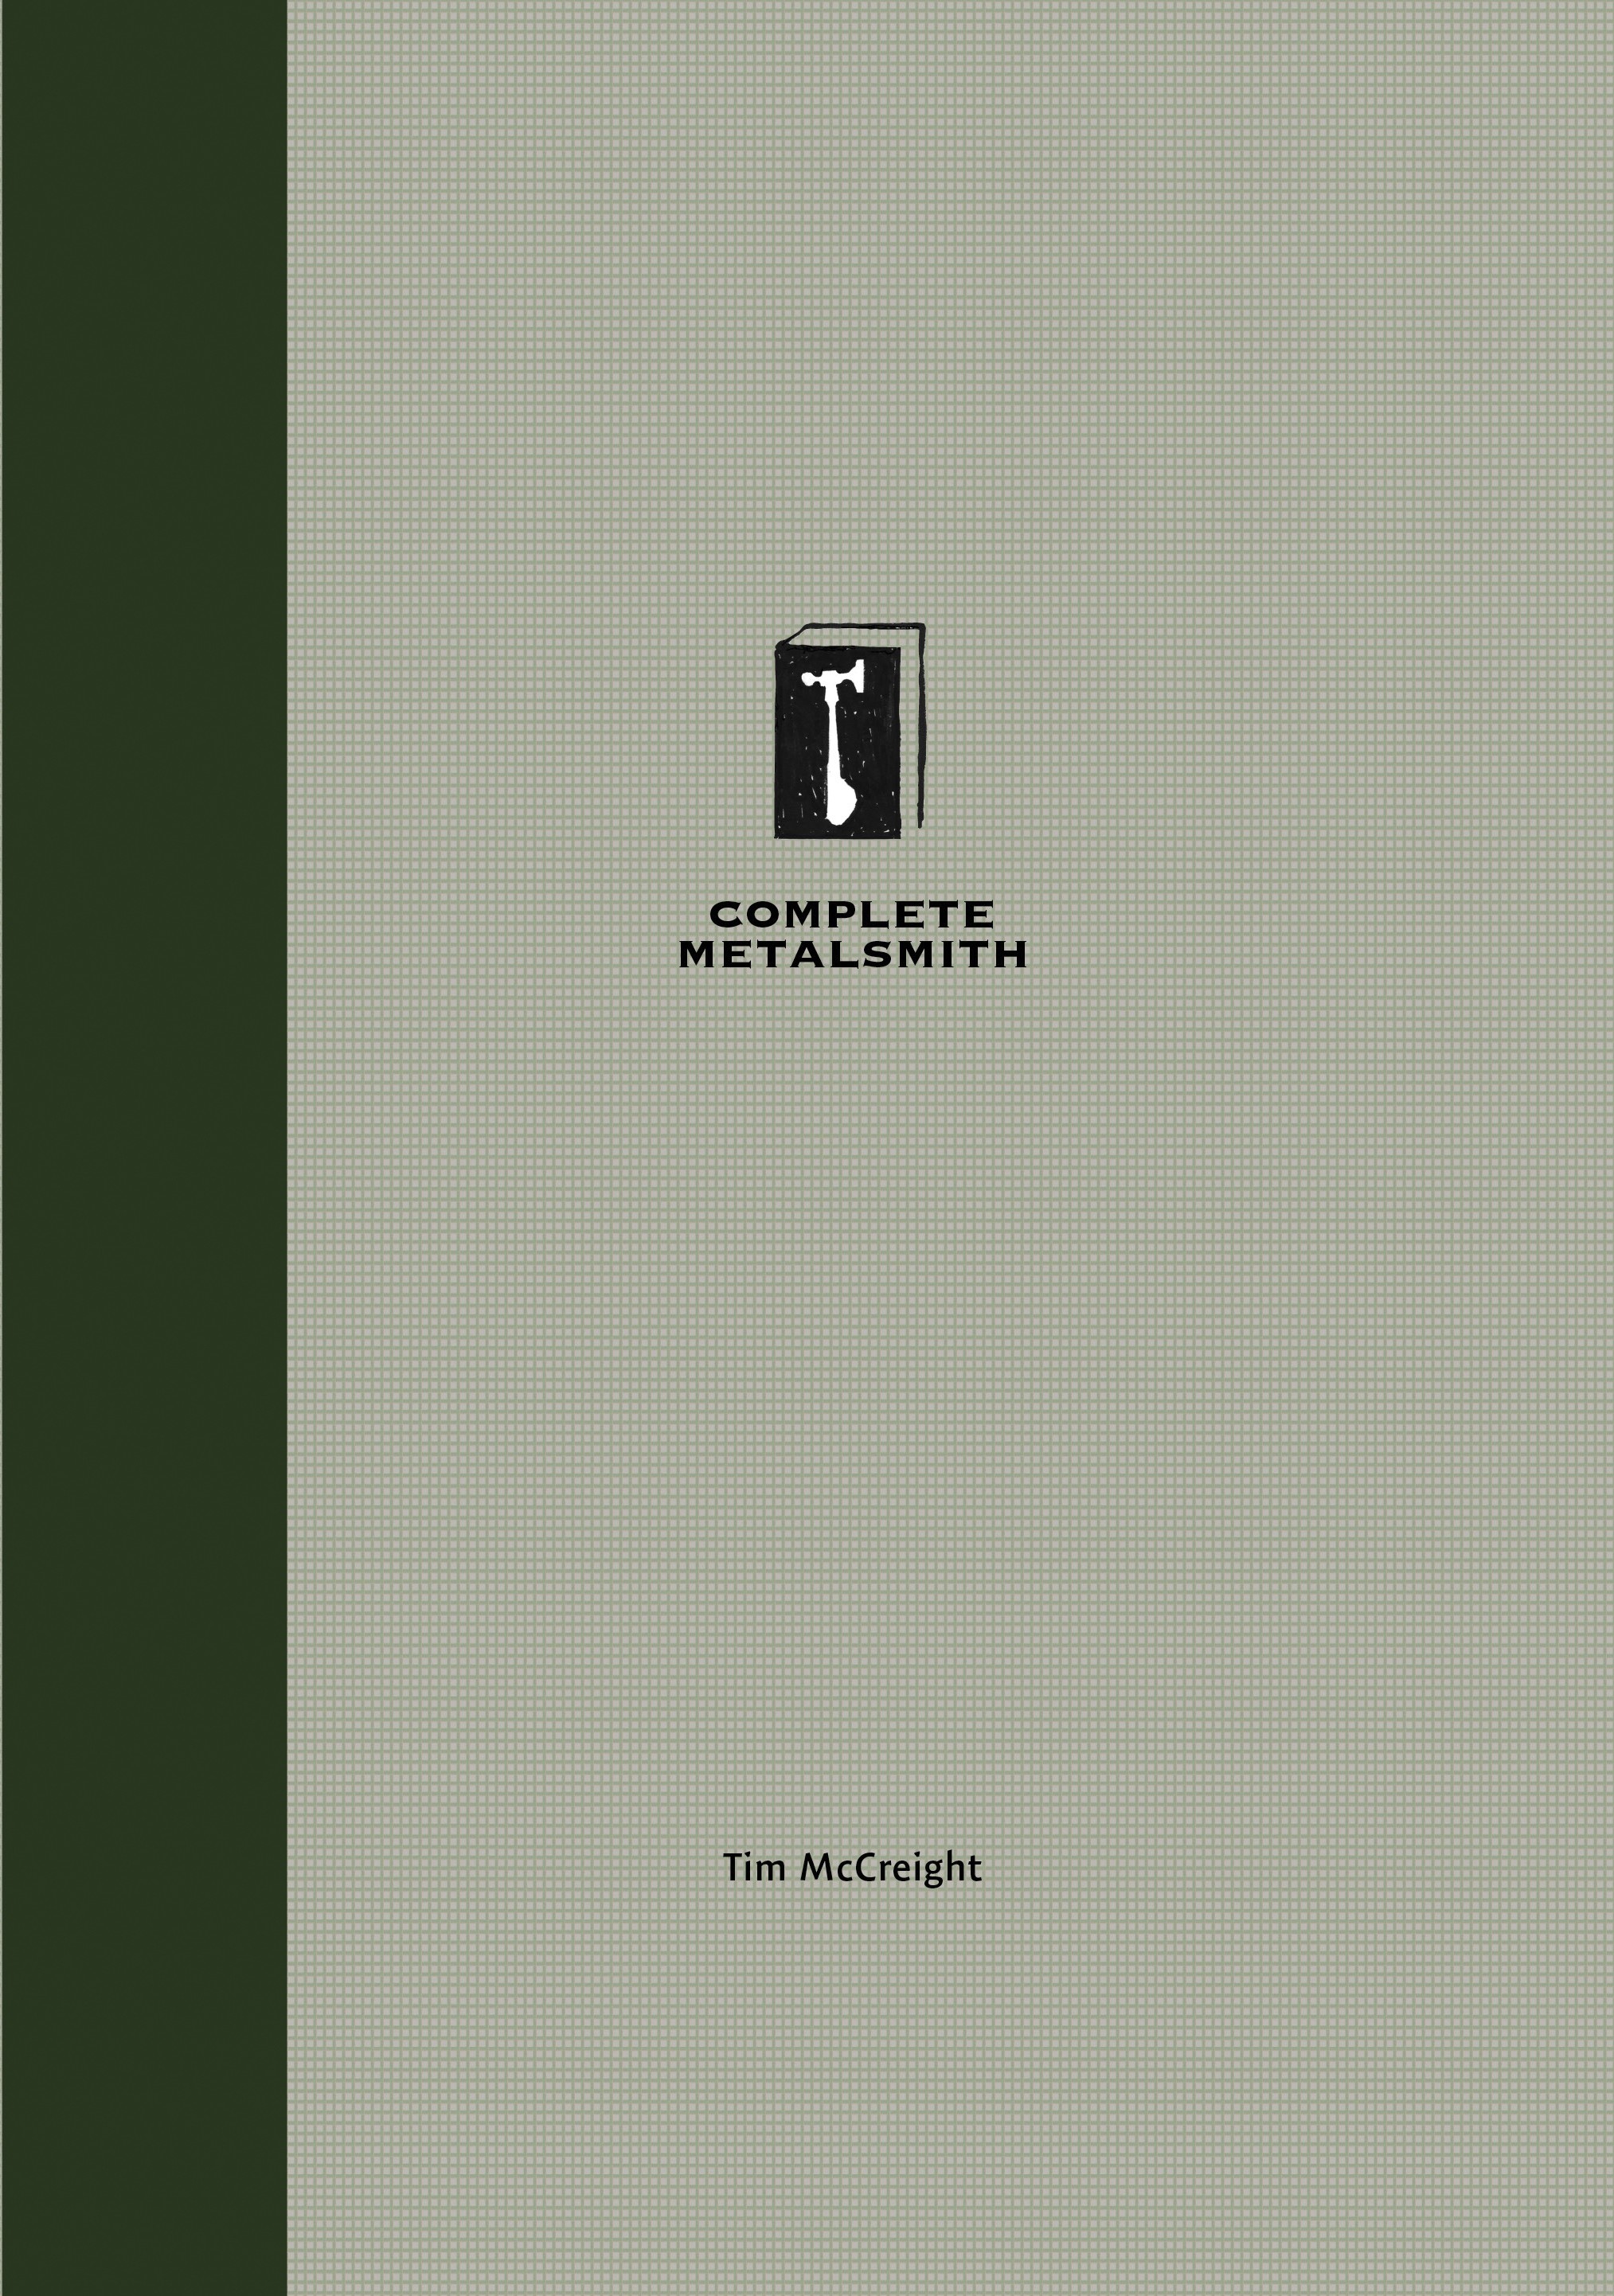 The Complete Metalsmith: Student Edition by Tim McCreight